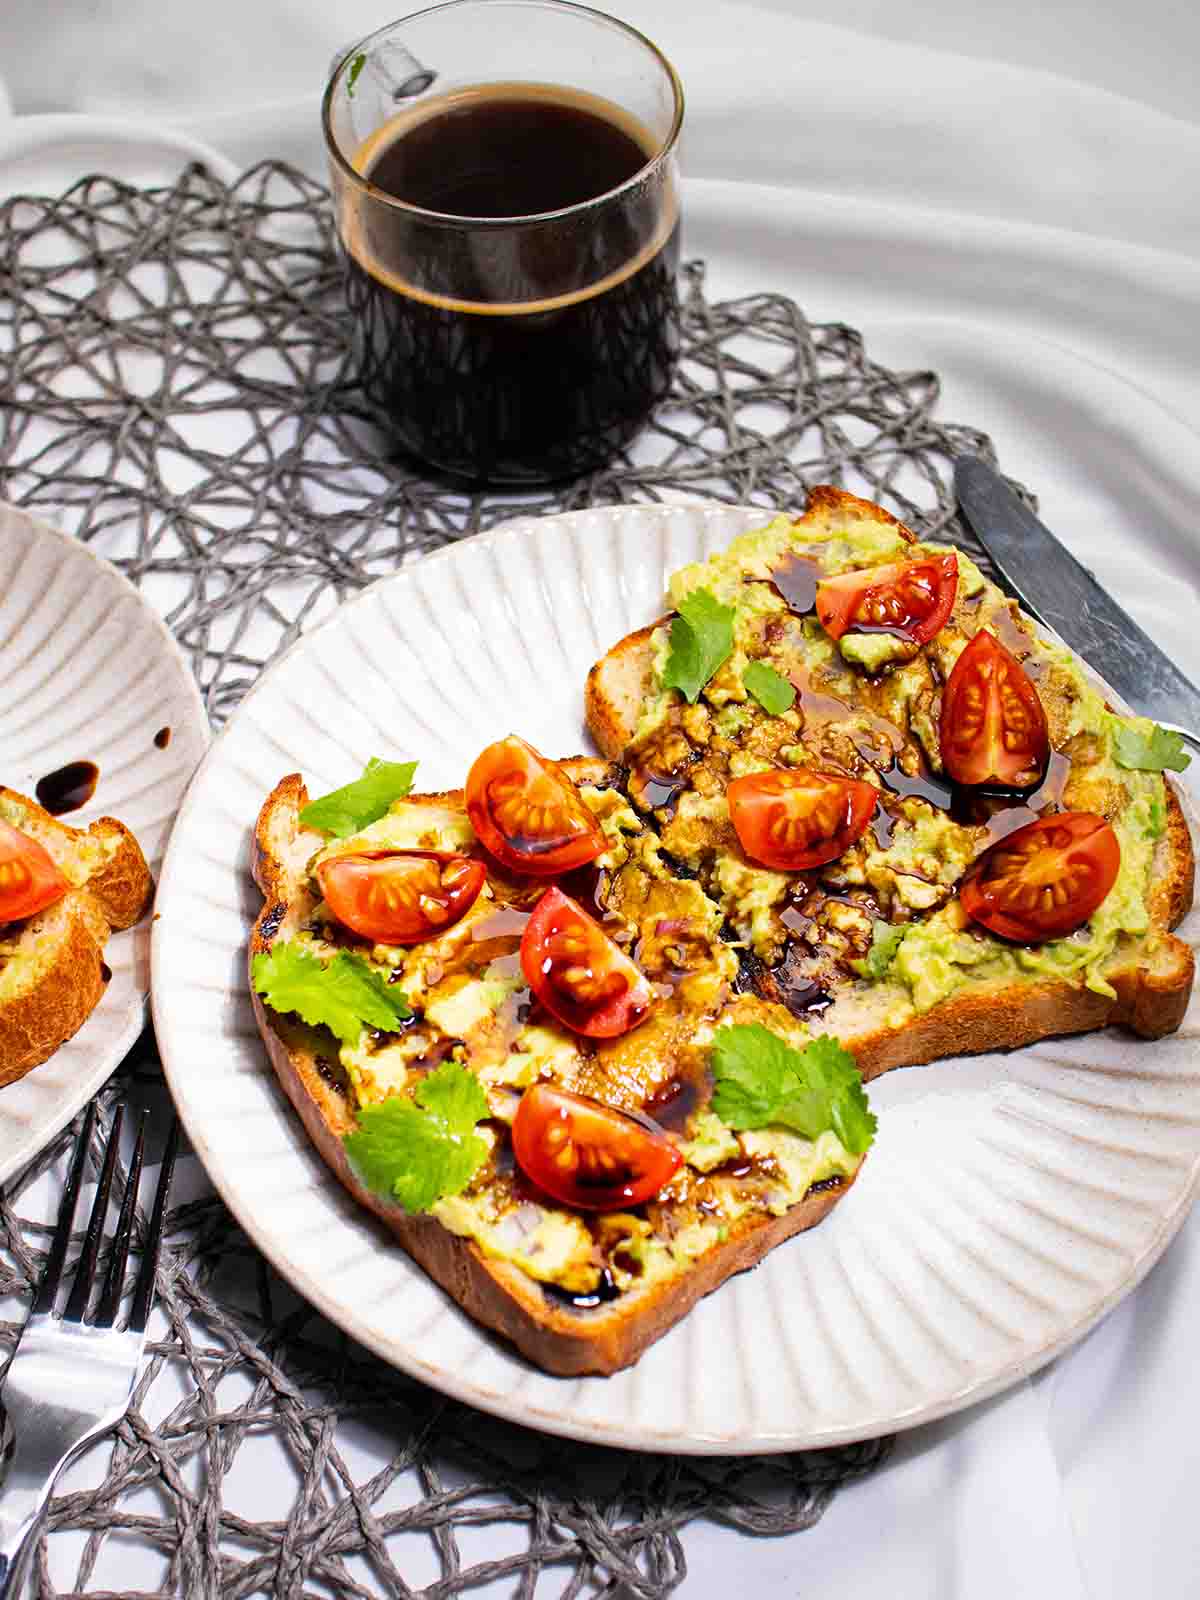 two pieces of avocado toast on a plate with coffee